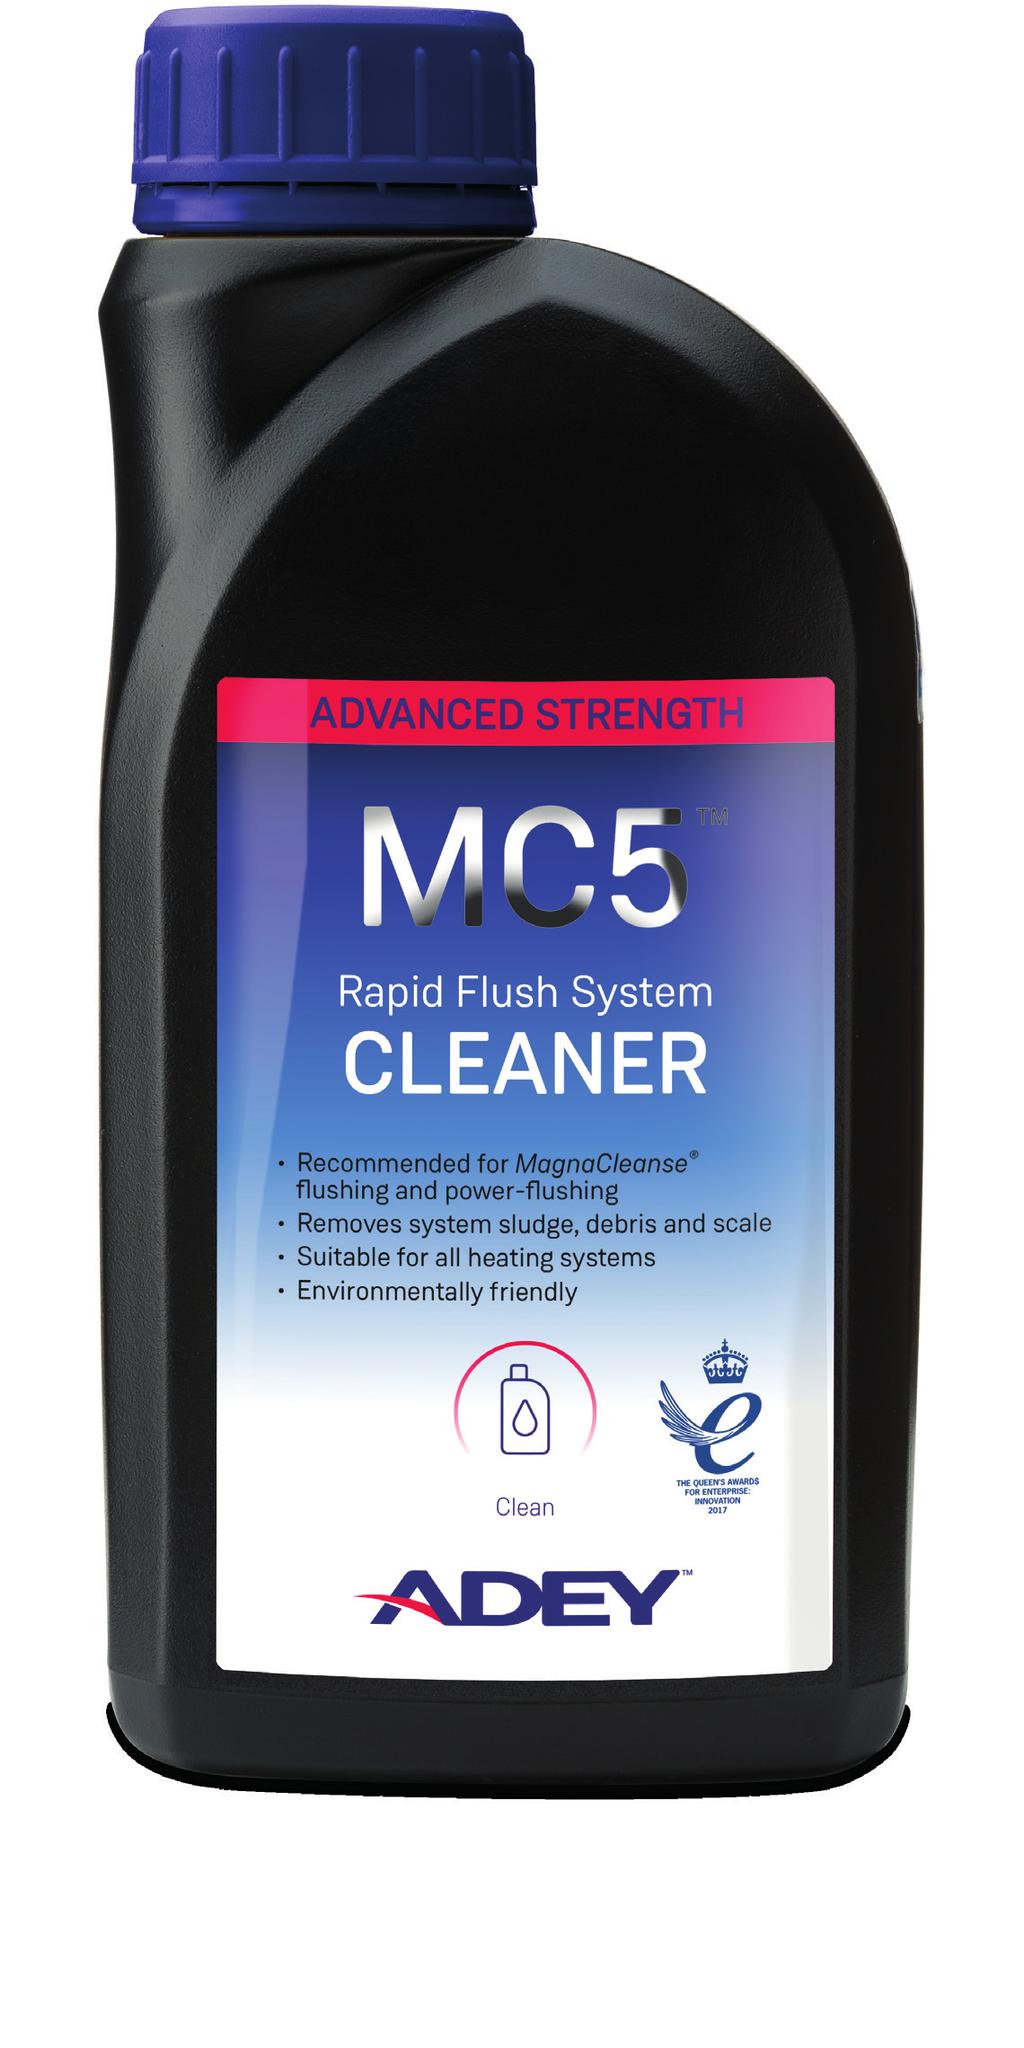 Rapid Flush System CLEANER MC5 RapidFlush System Cleaner is an advanced high strength cleaner developed specifically to work with ADEY s MagnaCleanse system and removes central heating system sludge,